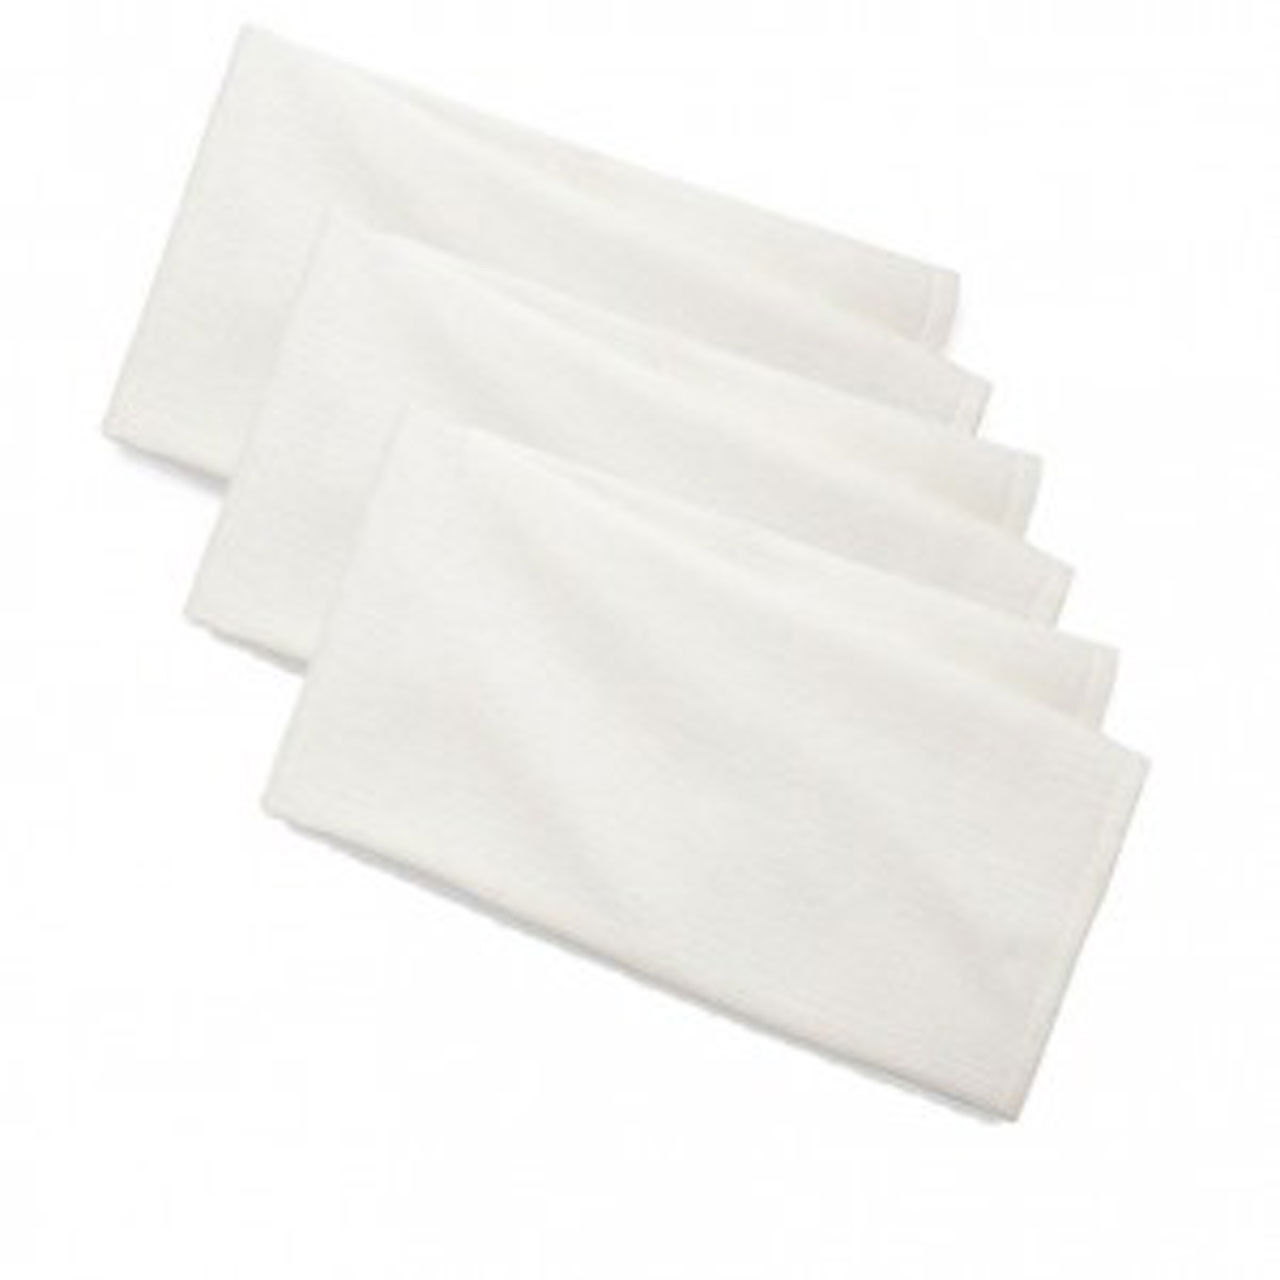 What material are the White Huck Towels made of?